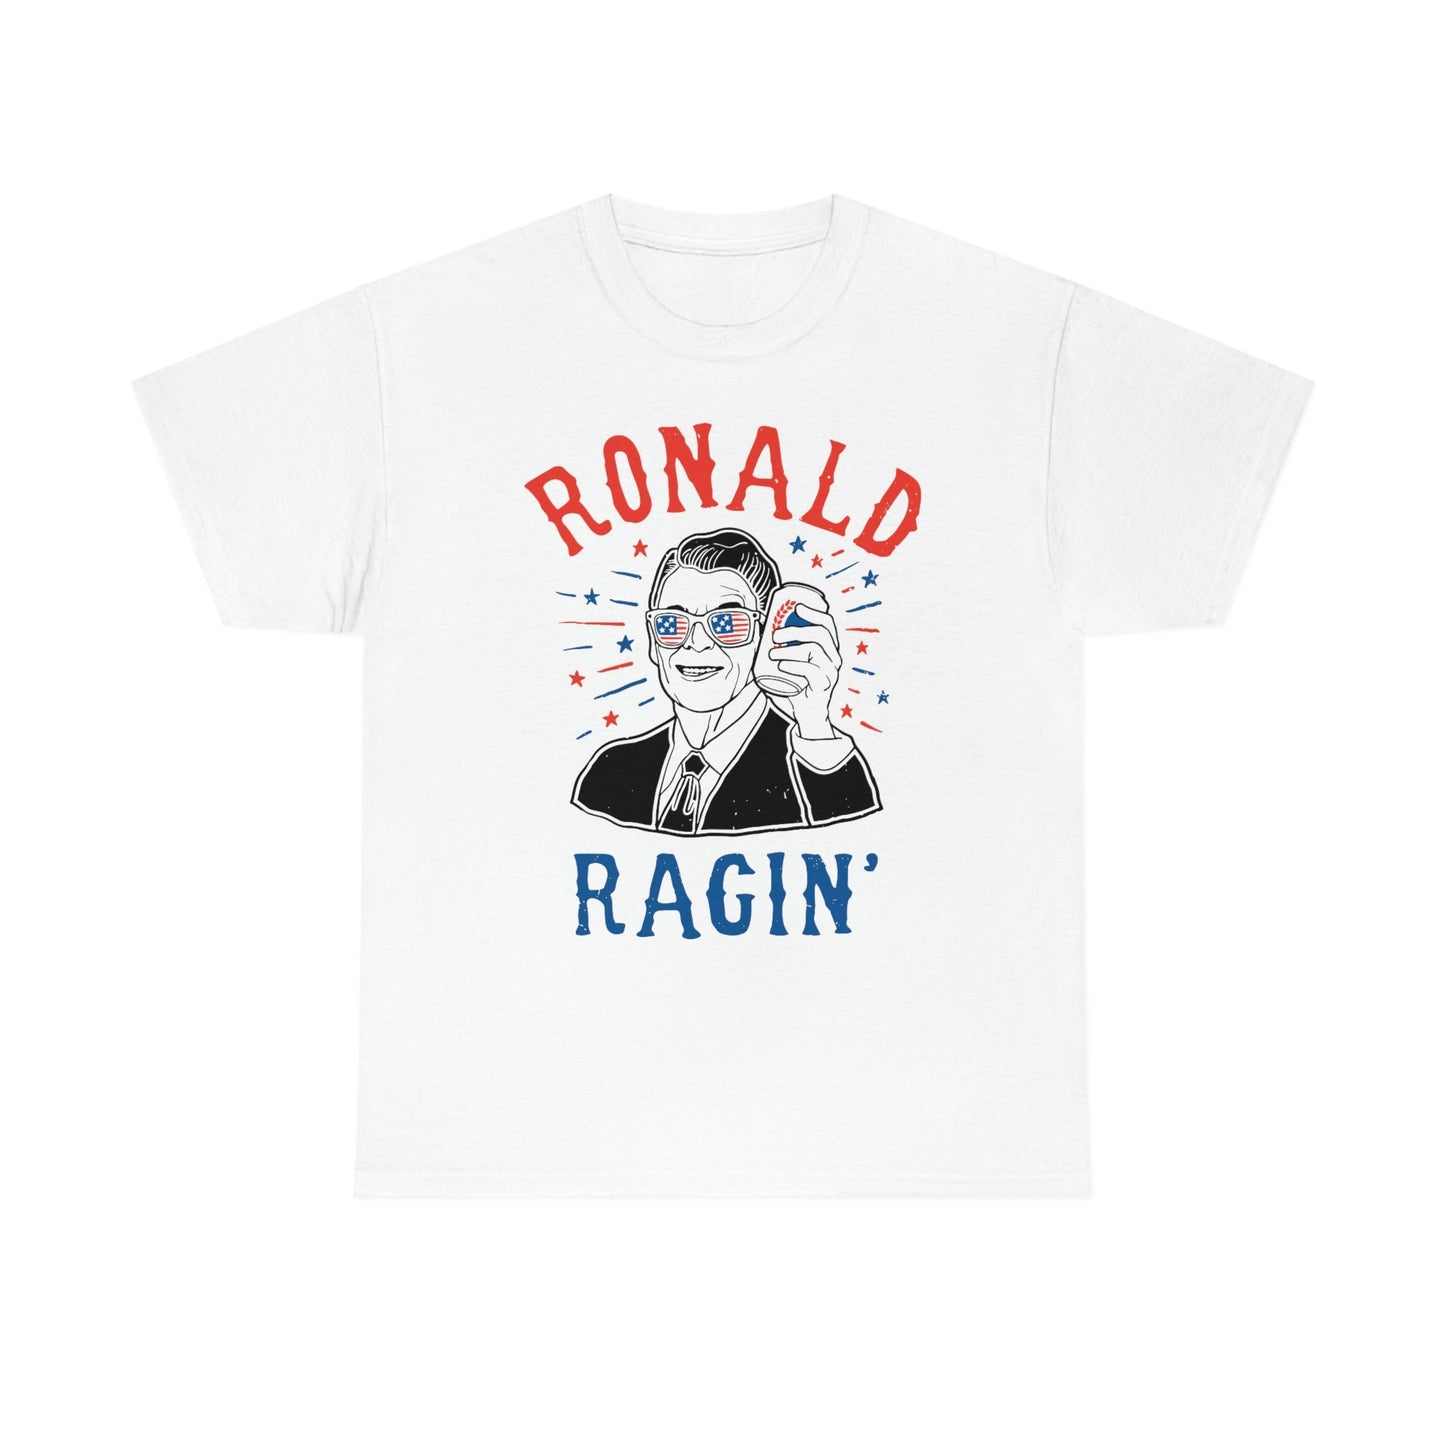 Ronald Ragin' Independence Day Drinking Tee, Independence Day Graphic Tee, Fourth of July Tee, Plus Size Tee, 4th Of July Party, Summer Tee